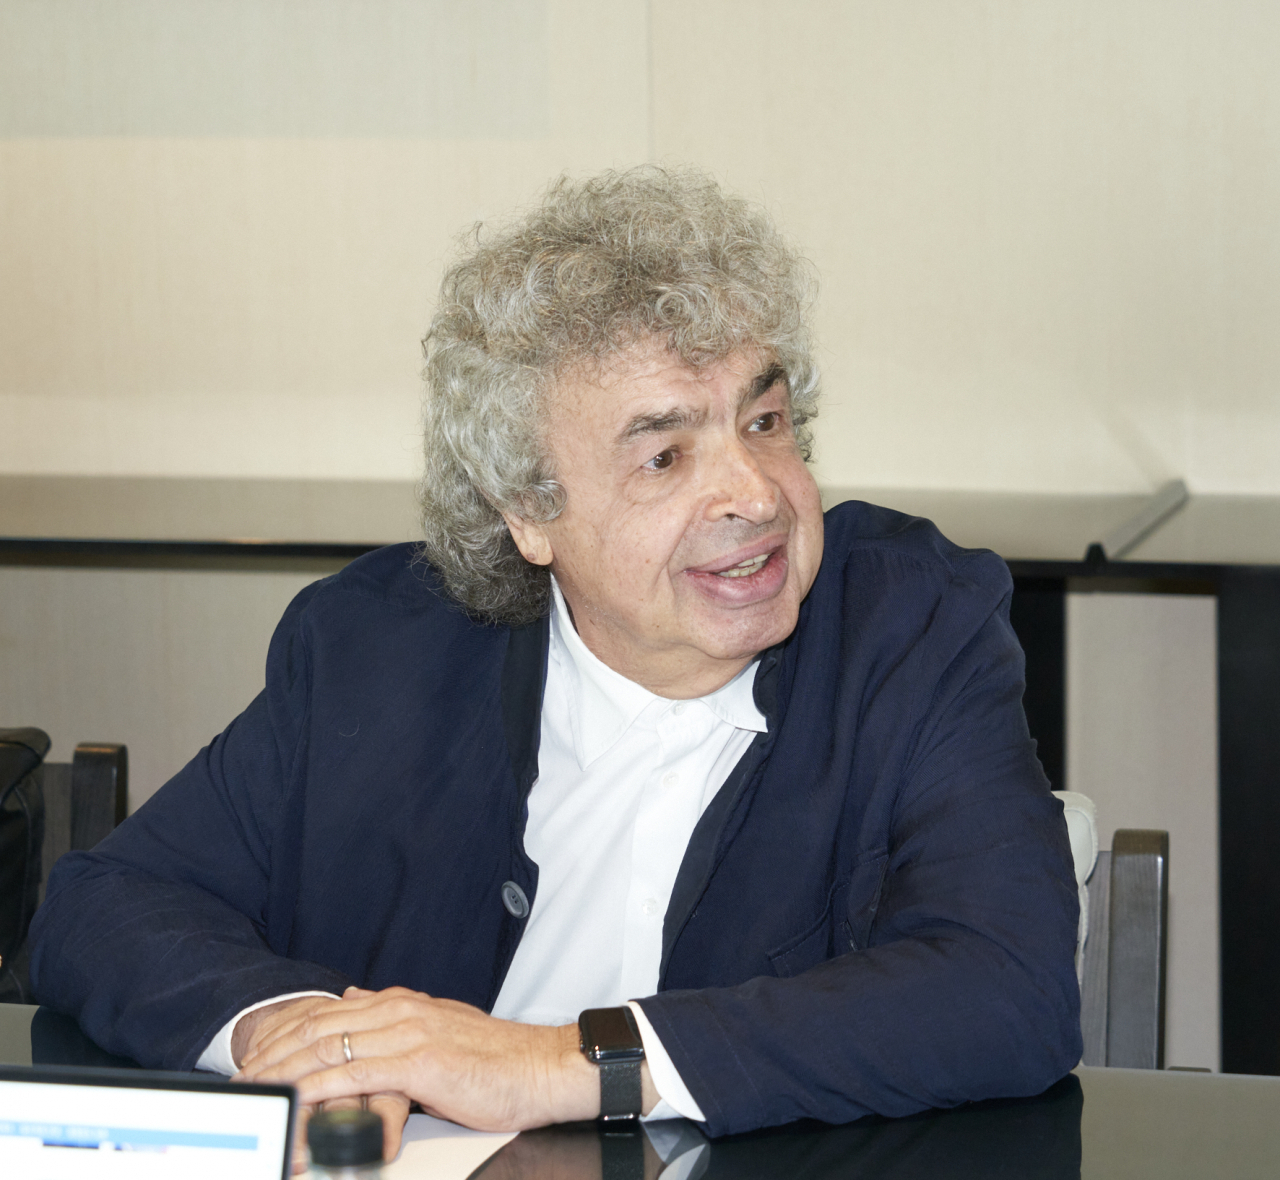 Semyon Bychkov, chief conductor and artistic director of the Czech Philharmonic, speaks during a press conference on Monday in Seoul. (Base-note)